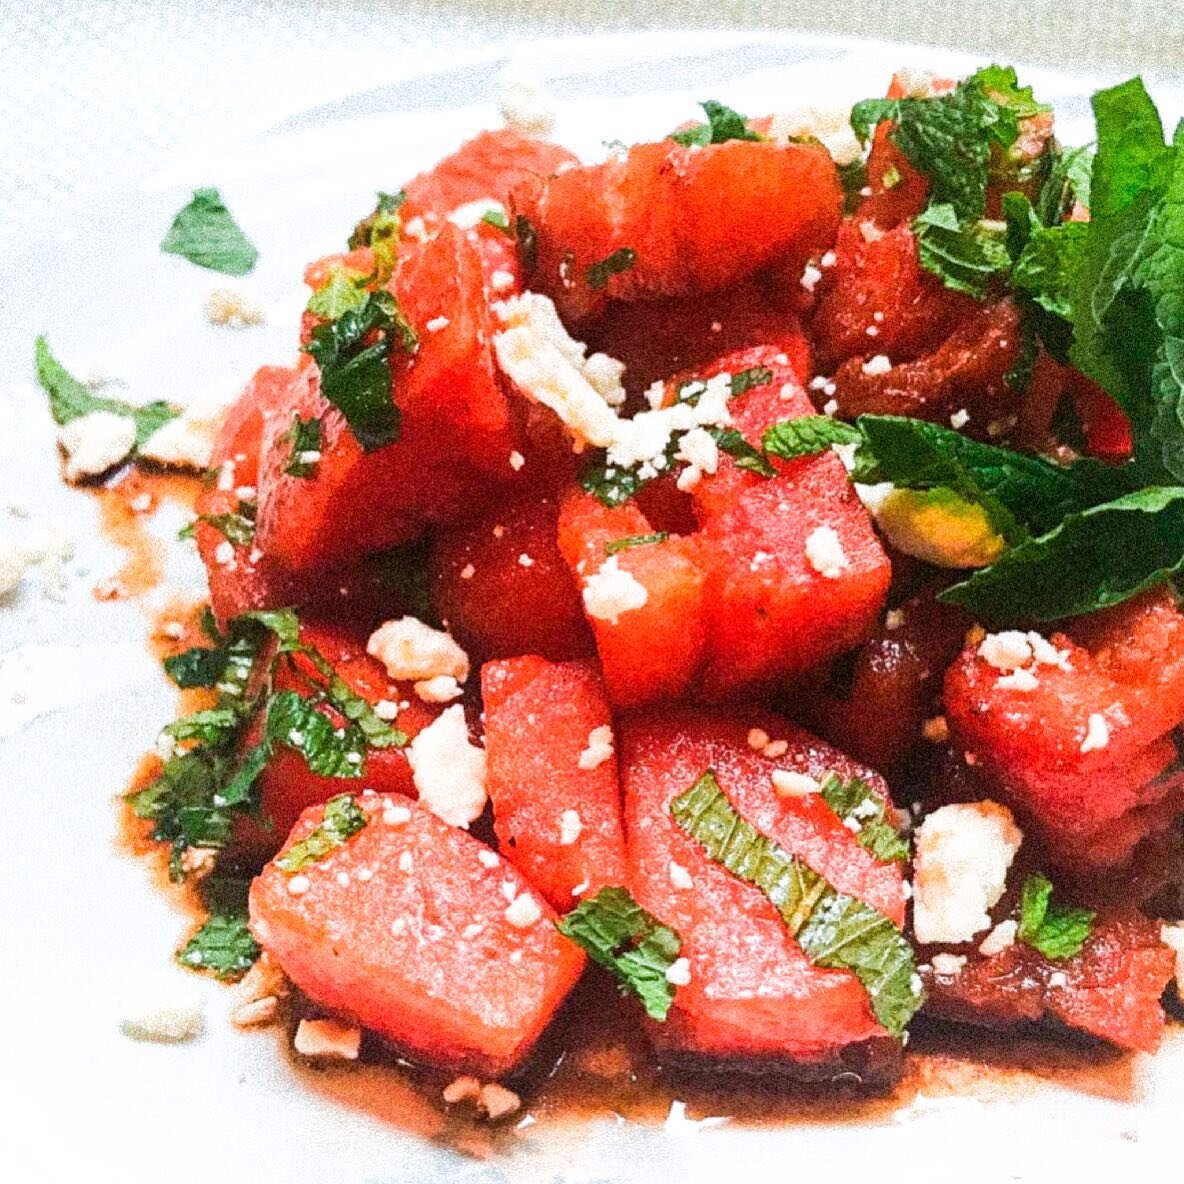 Happy Friday! Summer is here and there is nothing more refreshing than eating Watermelon Feta &amp; Mint Salad! A cool treat, perfect for your cookout this weekend.

Recipe linked in bio.

#watermelon #watermelonfetasalad #summervibes #summersalad